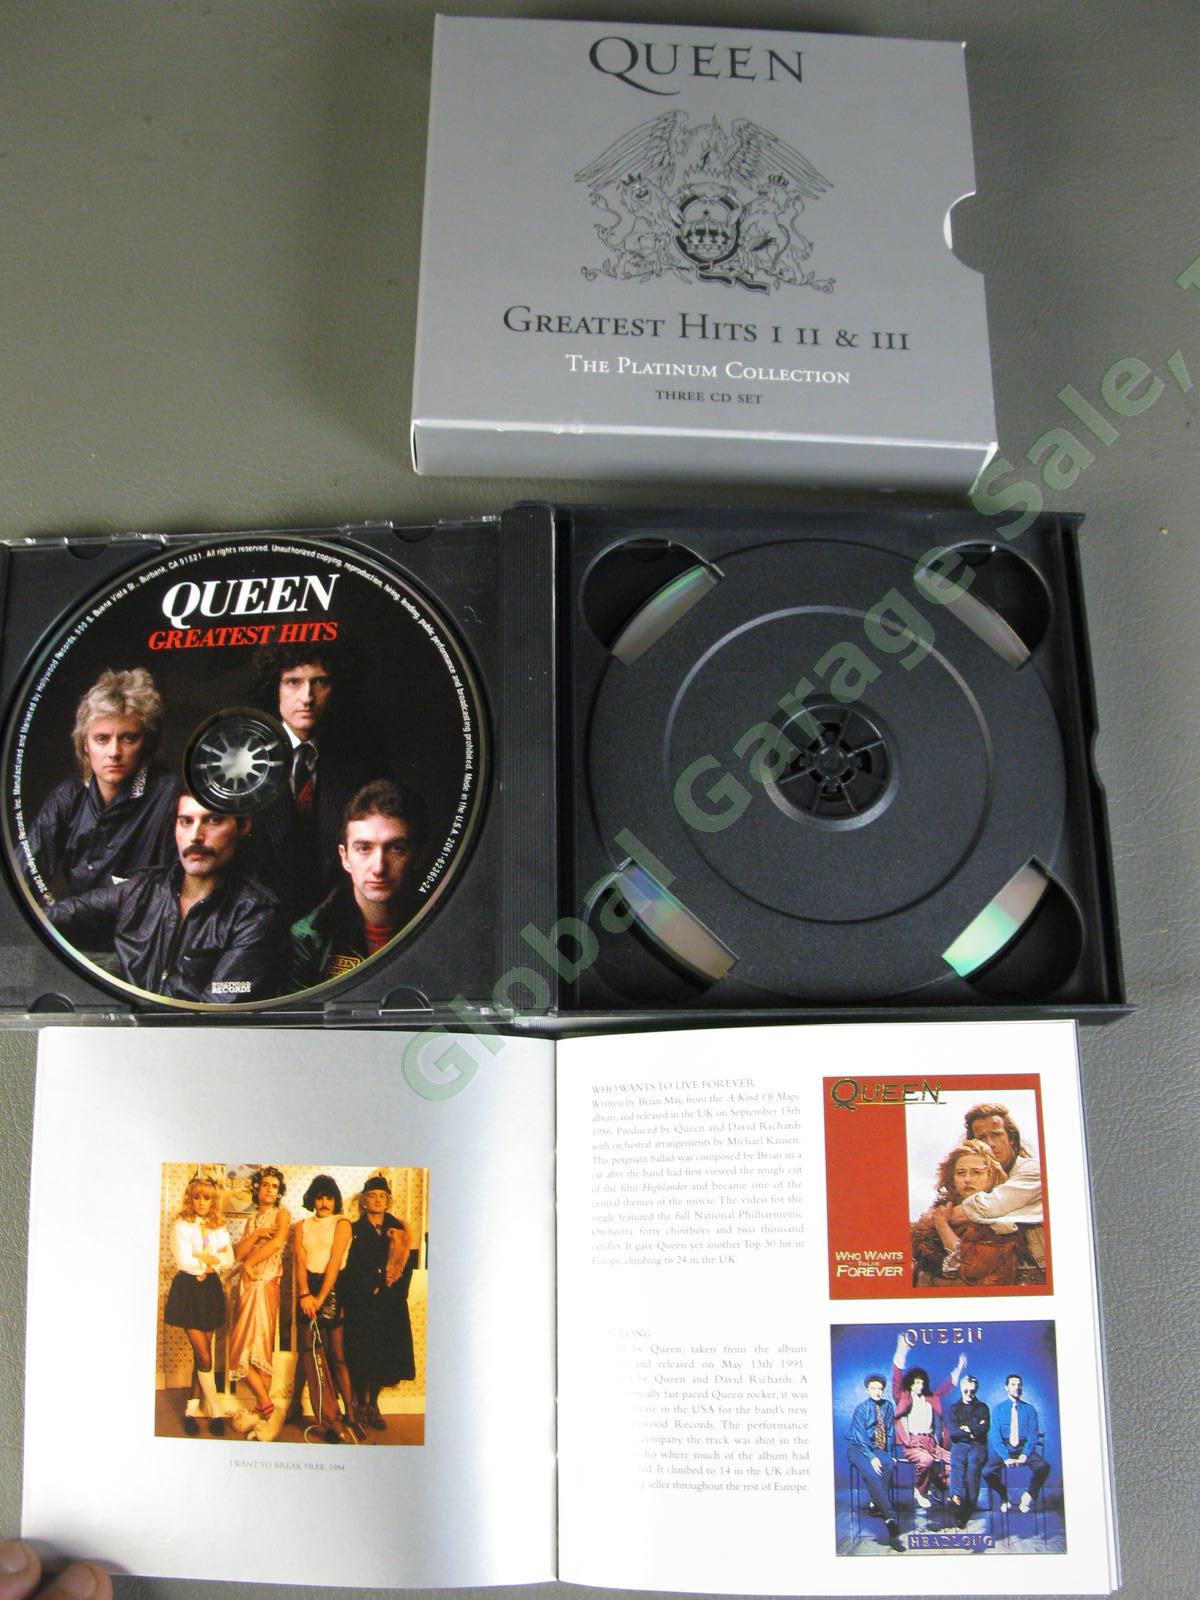 Queen Greatest Hits I II & III The Platinum Collection 3 CD Set Classic Rock NR 3